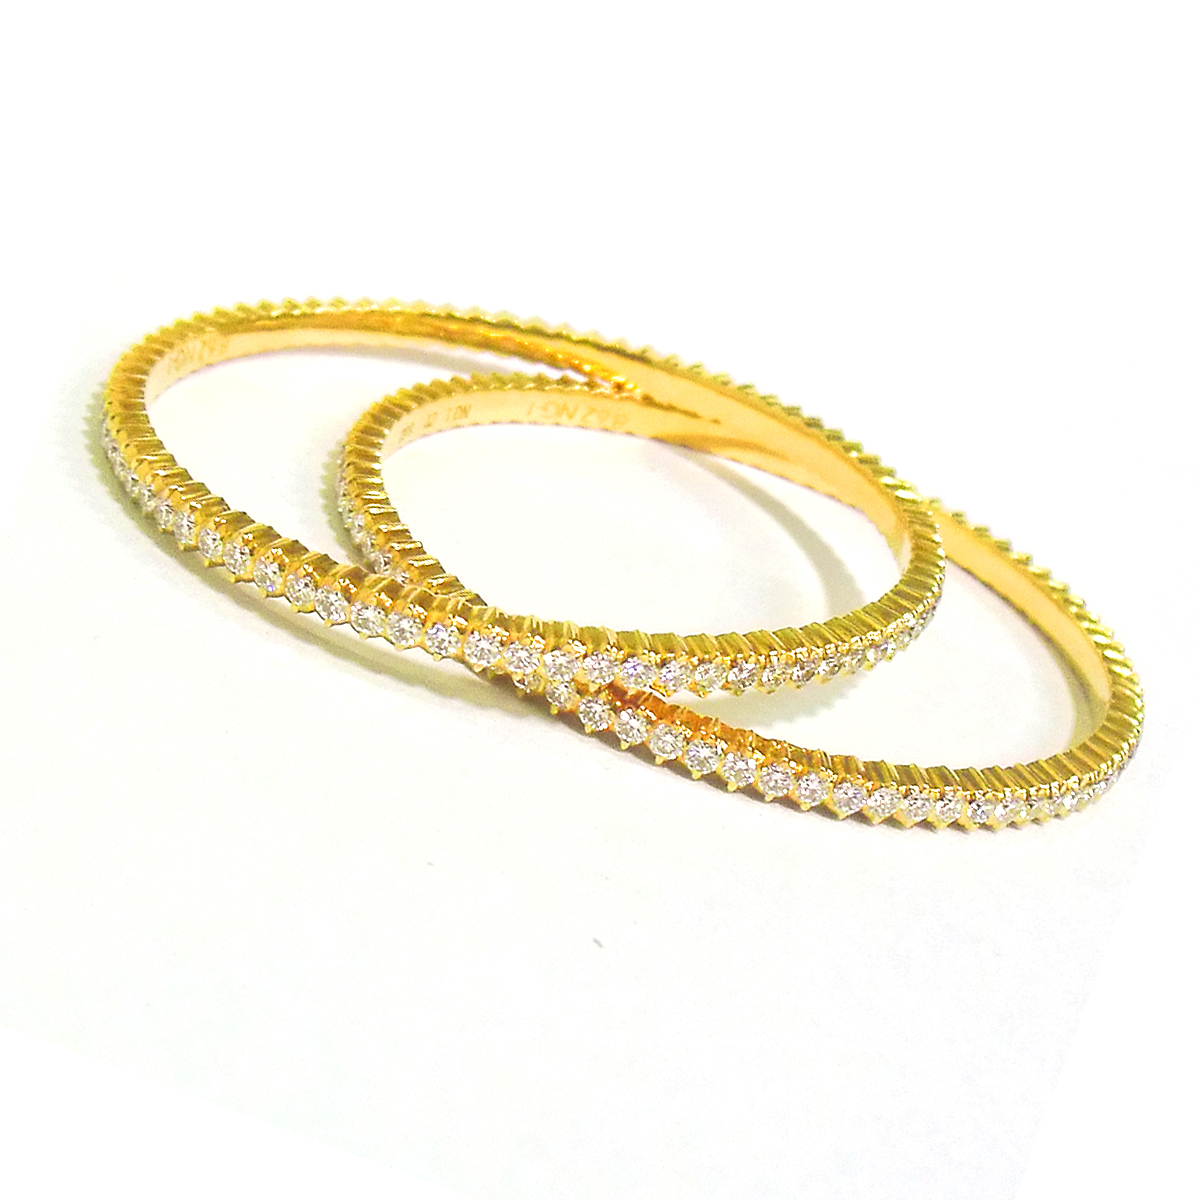 Buy Single Line Bangles Online | Browse Our Collection Today